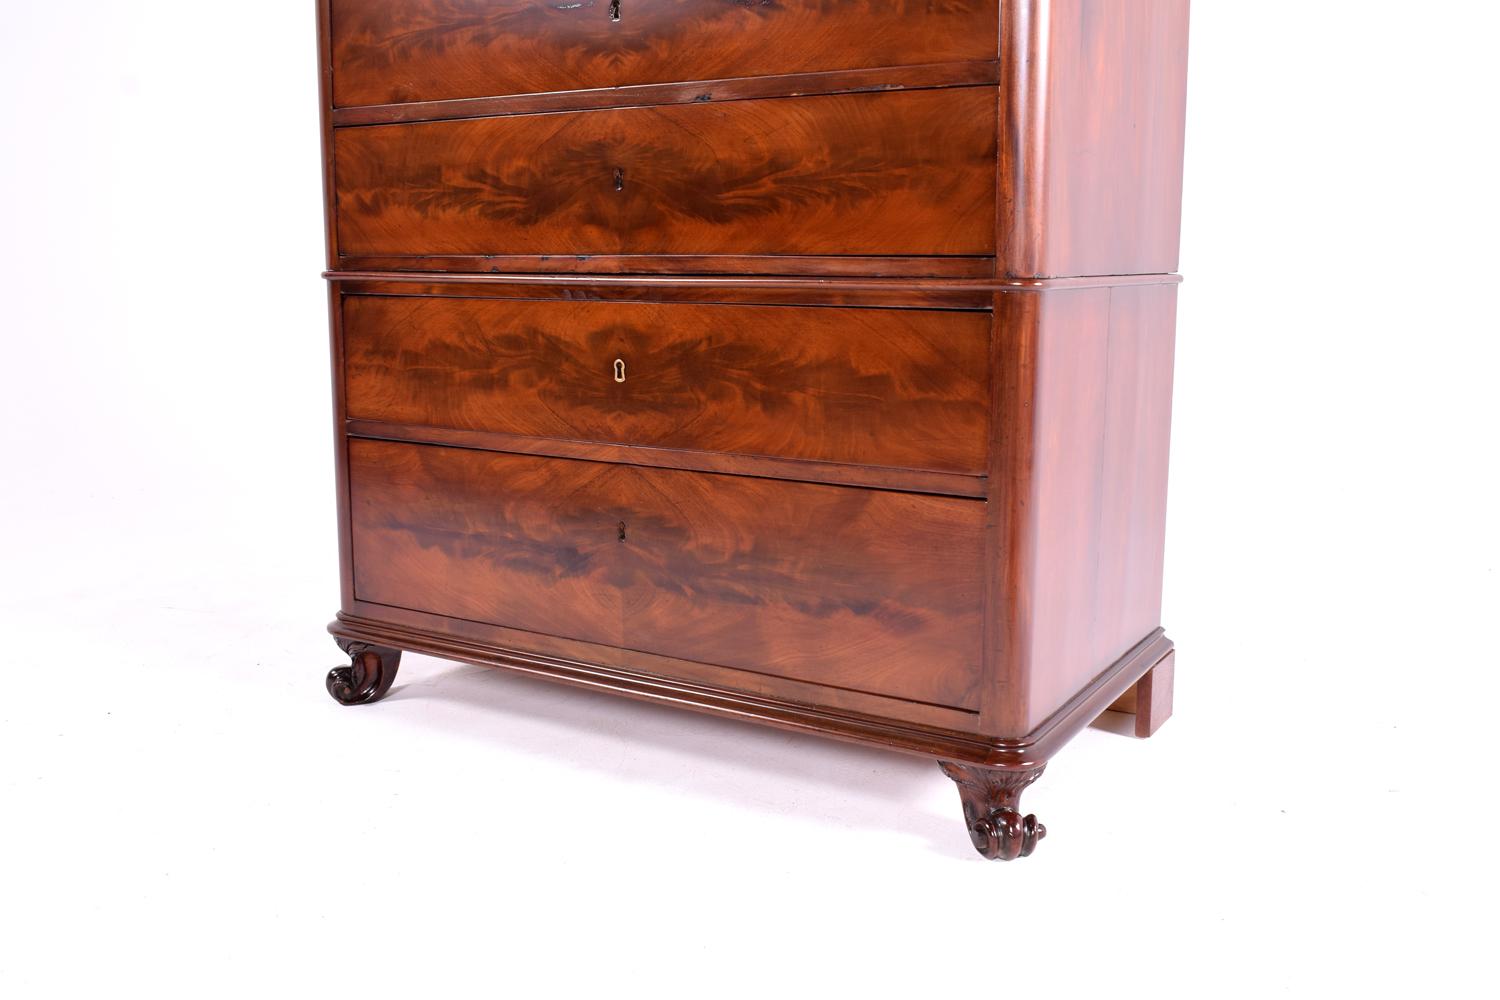 Danish Mid-19th Century Biedermeier Commode Tall Chest of Drawers 5